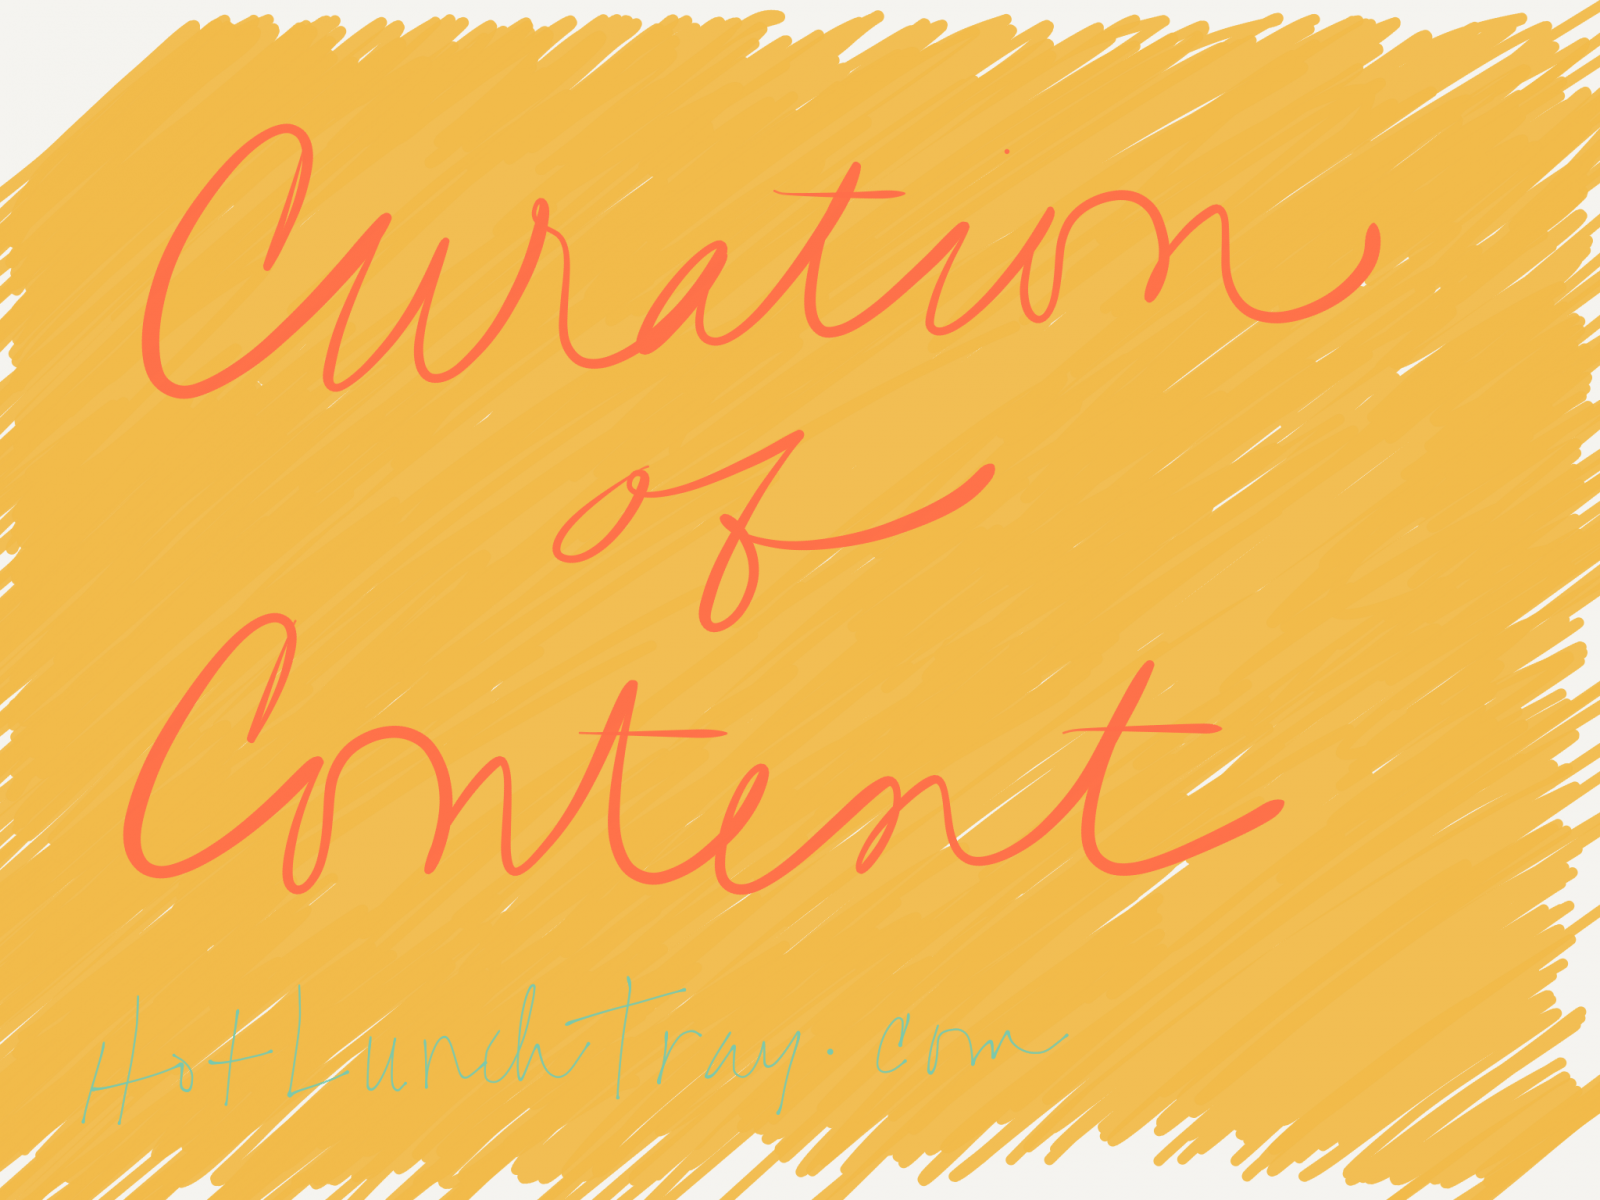 Curation of Content Sketch